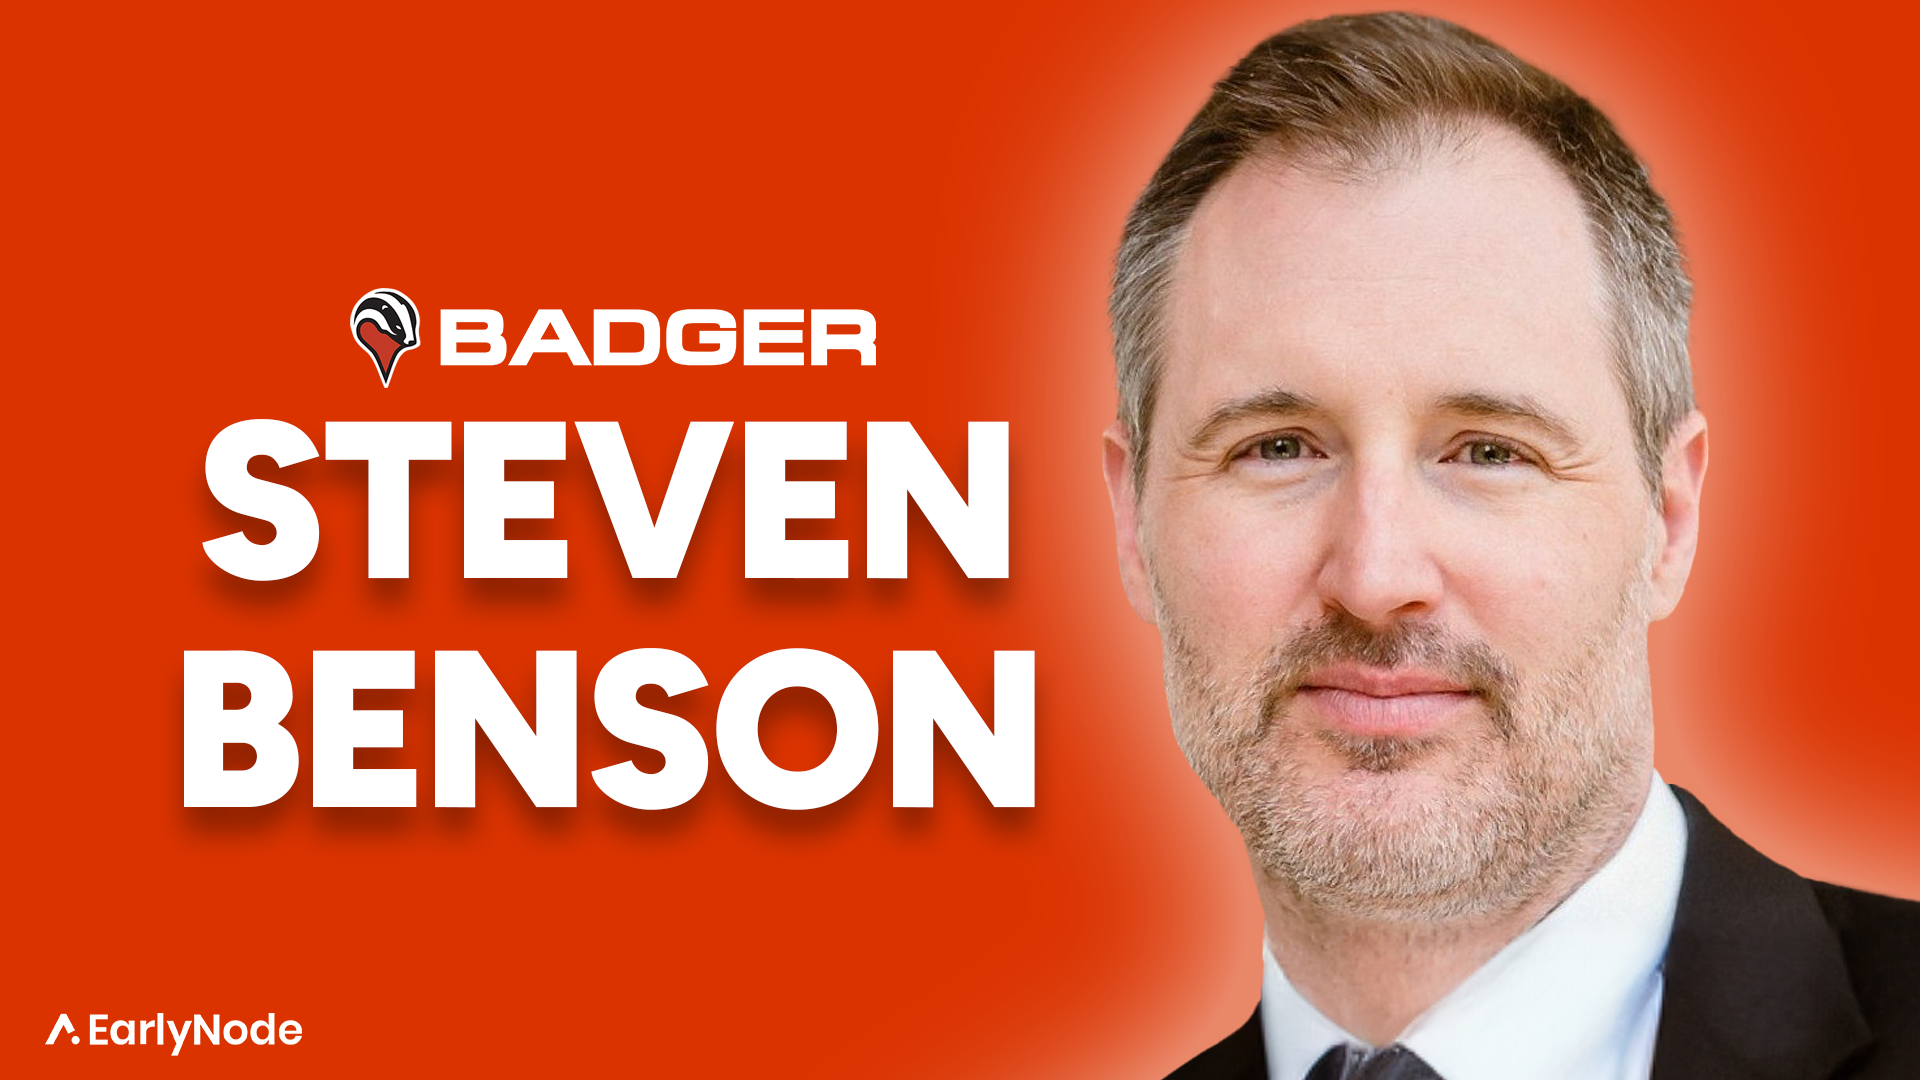 How to use Debt Financing to grow your SaaS, with Steve Benson (Founder of Badger Maps)